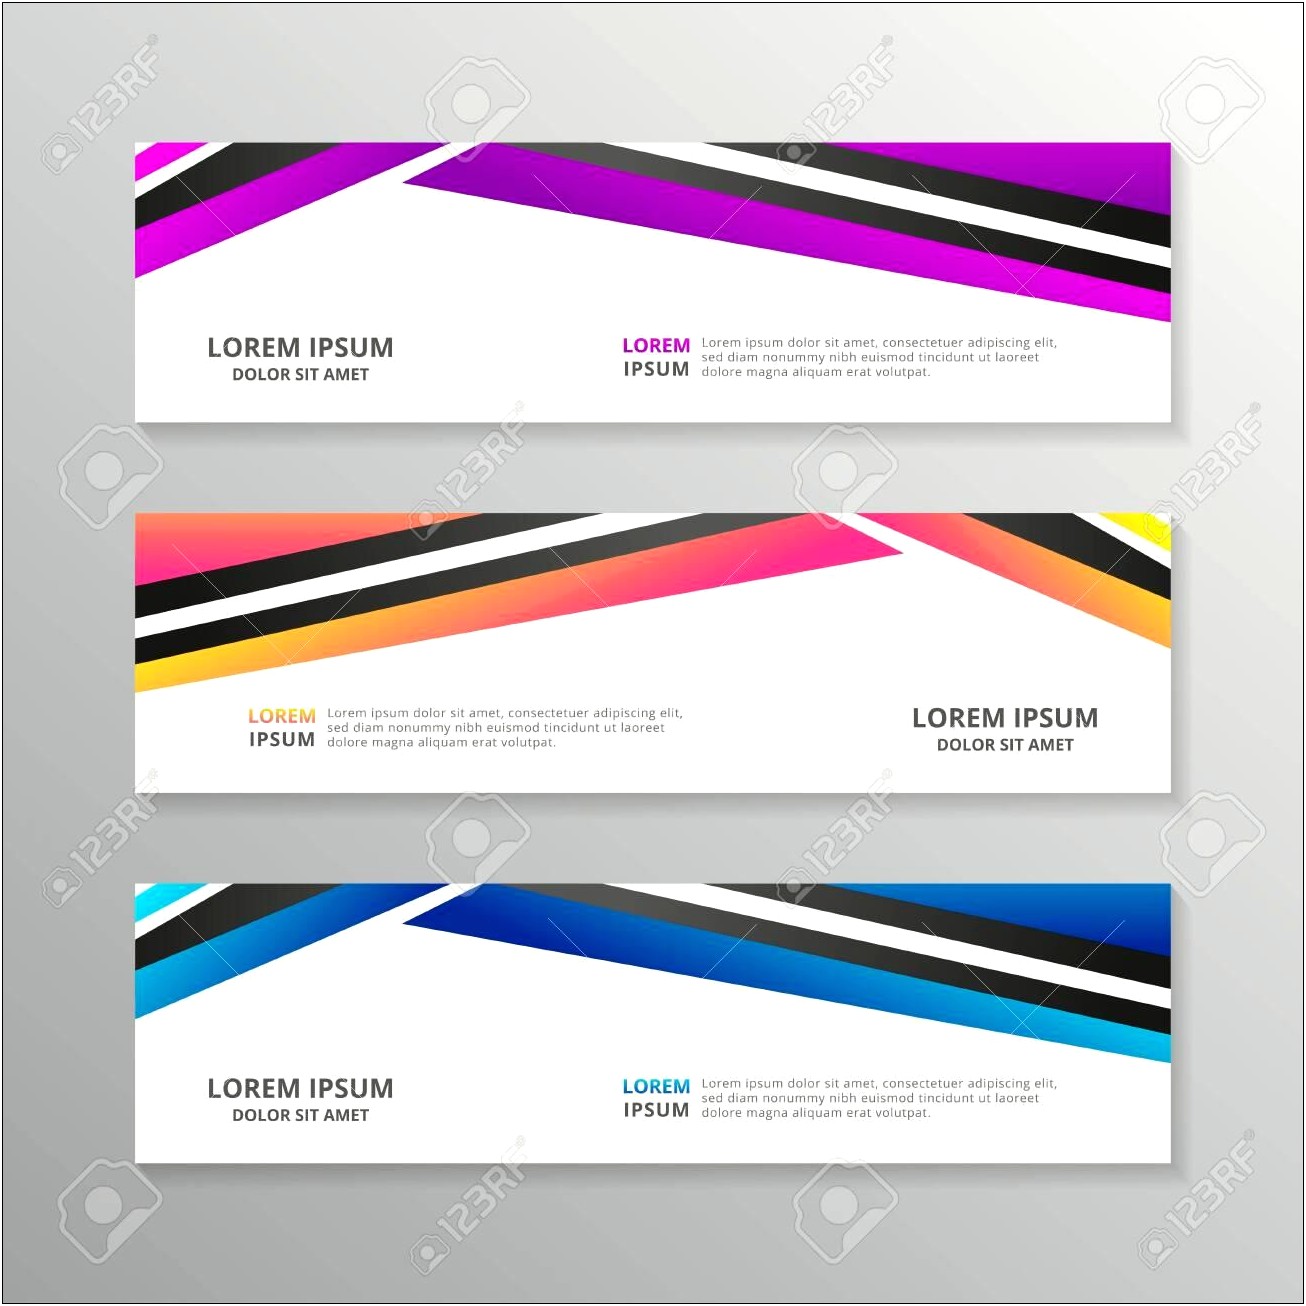 Header And Footer Templates Free Download